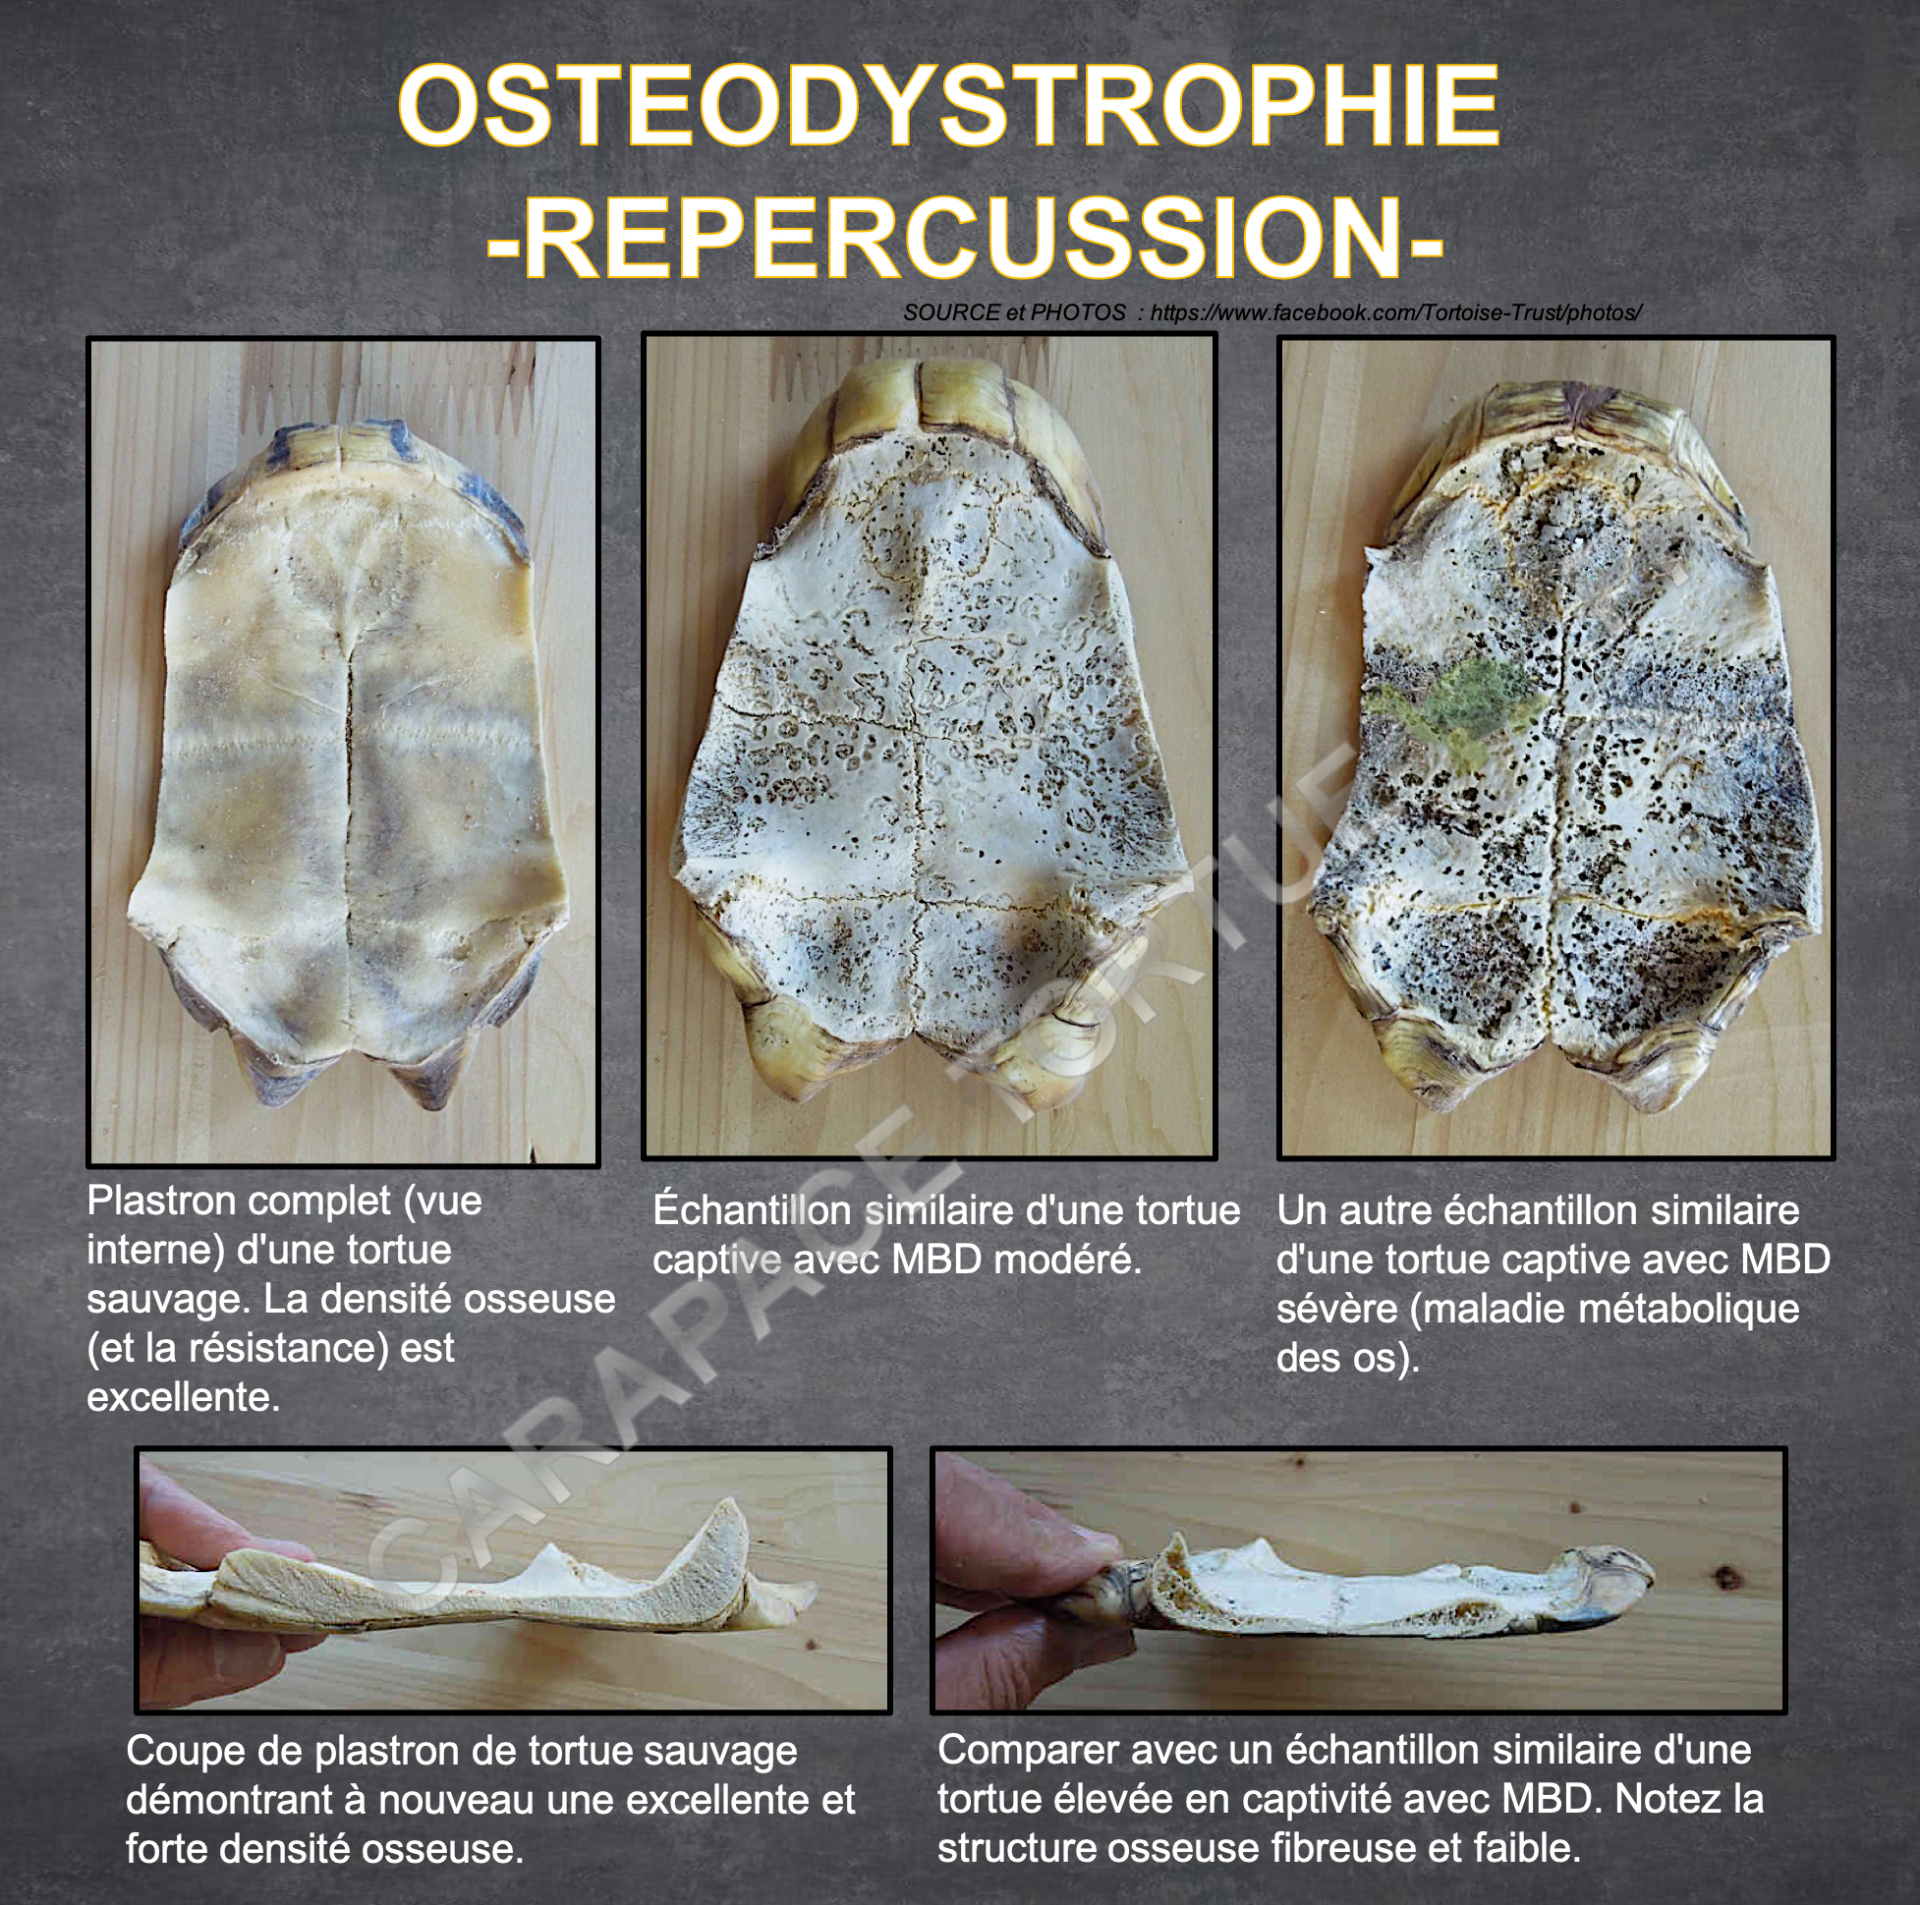 Osteodystrophie repercussion